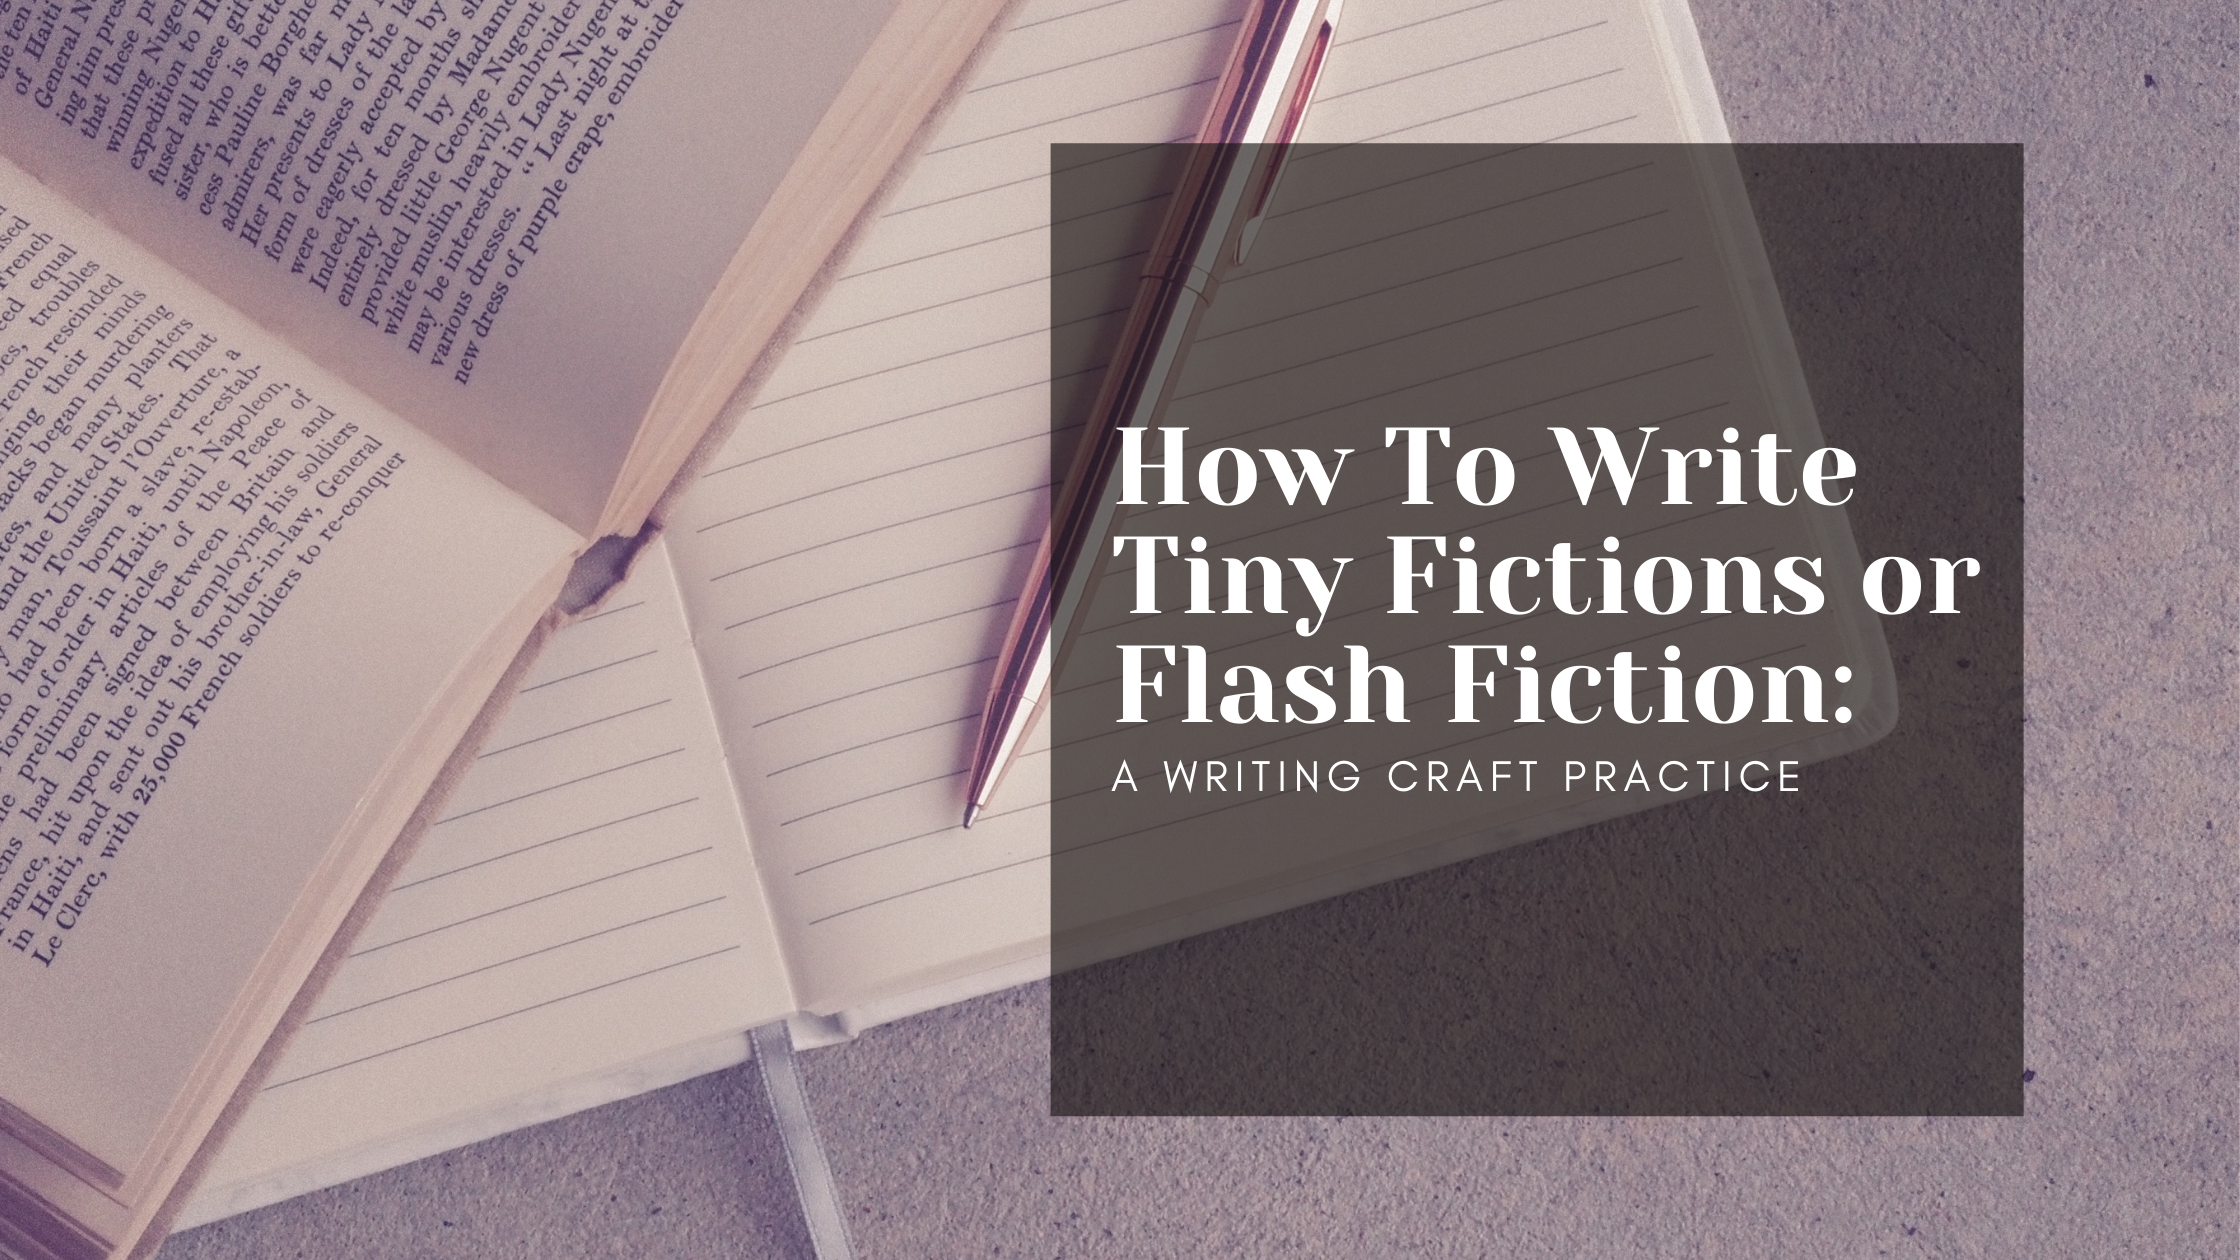 How To Write Tiny Fictions or Flash Fiction: A Writing Craft